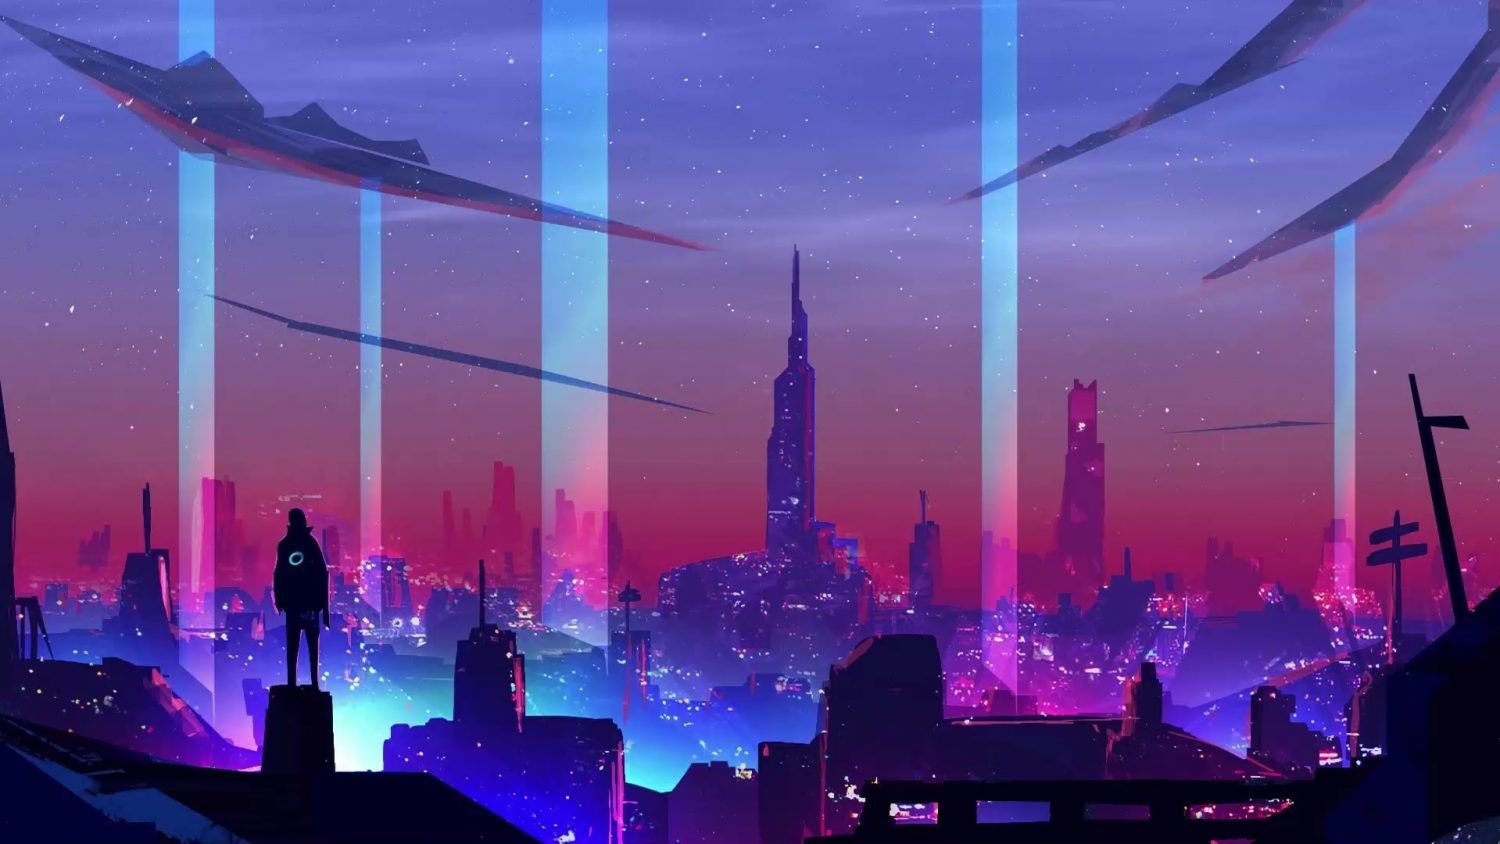 Neon Anime Town Wallpapers - Wallpaper Cave